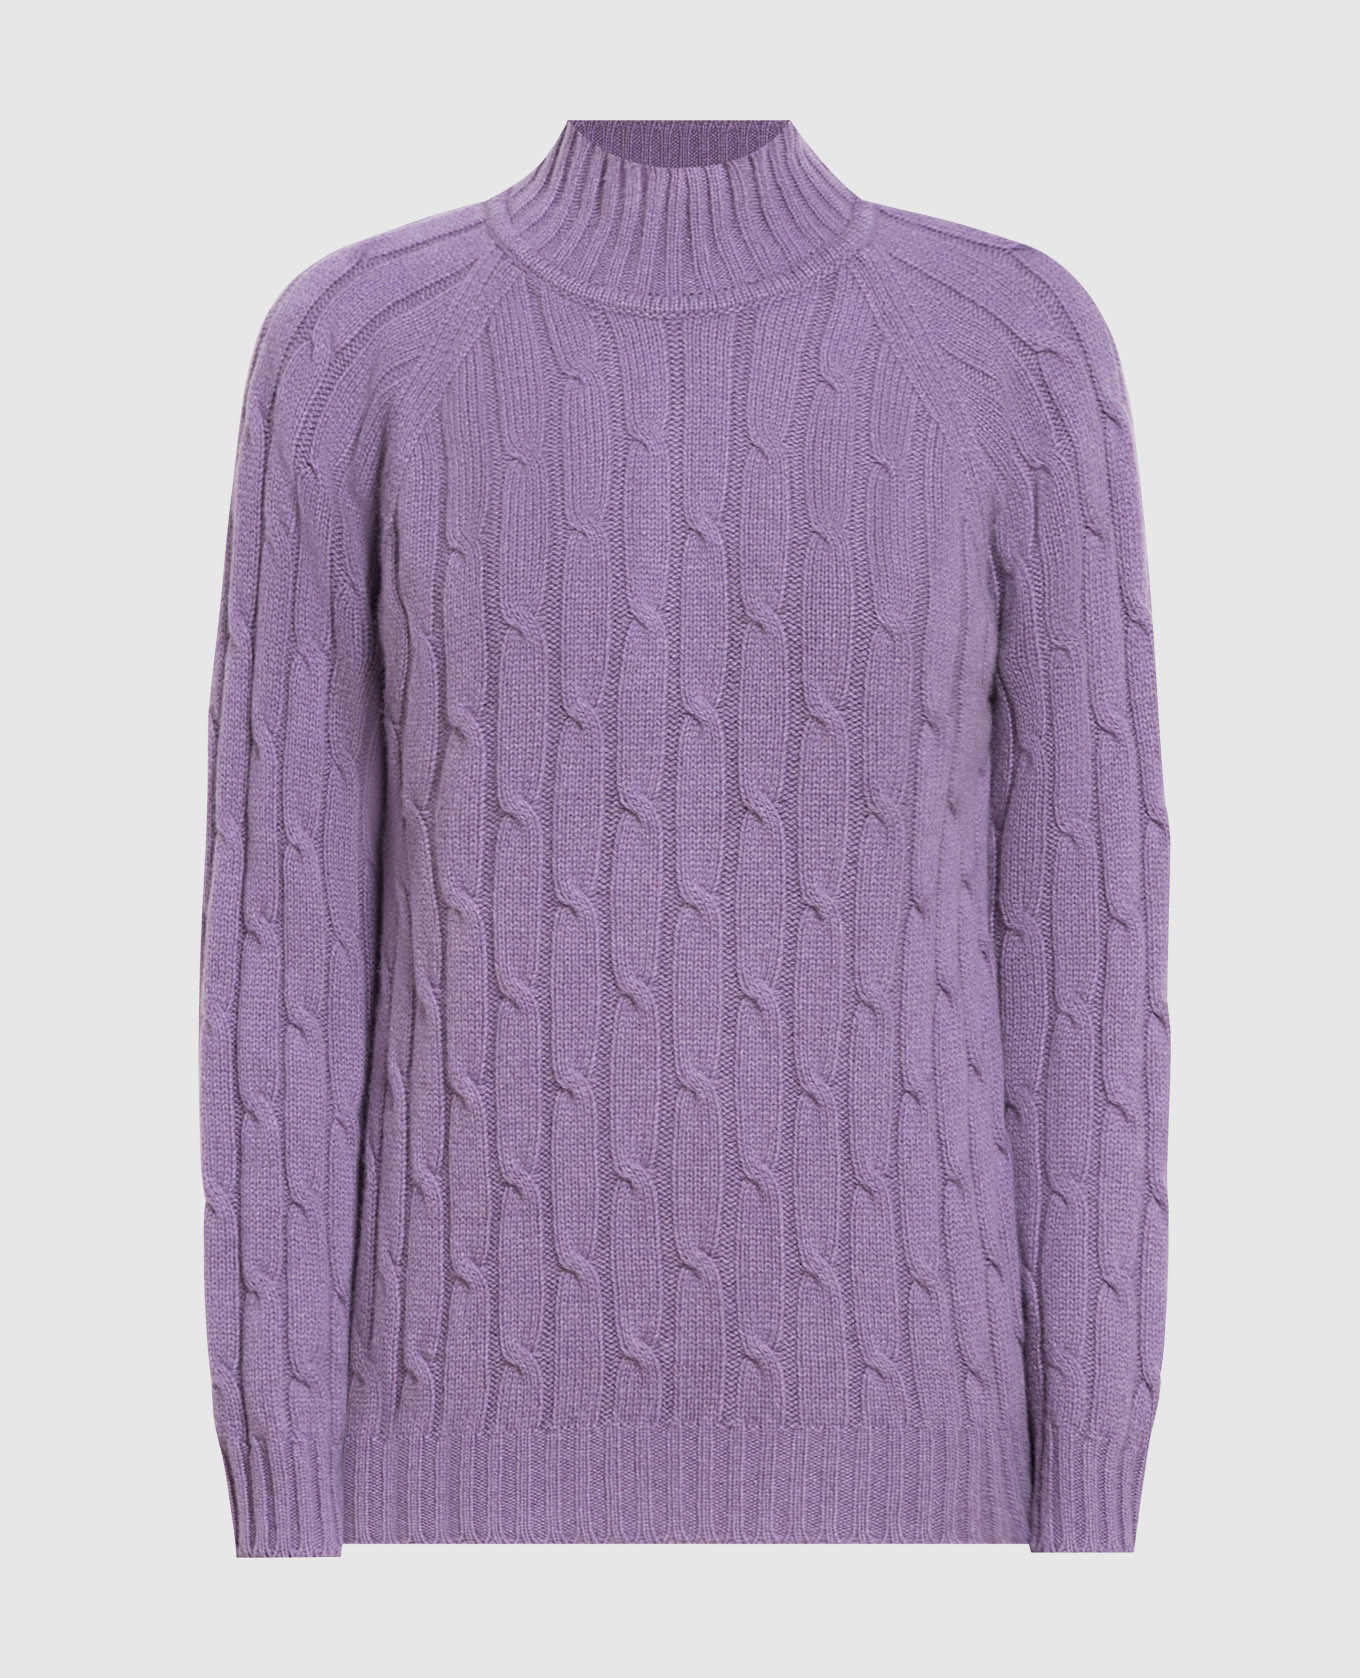 Purple sweater made of cashmere in a textured pattern